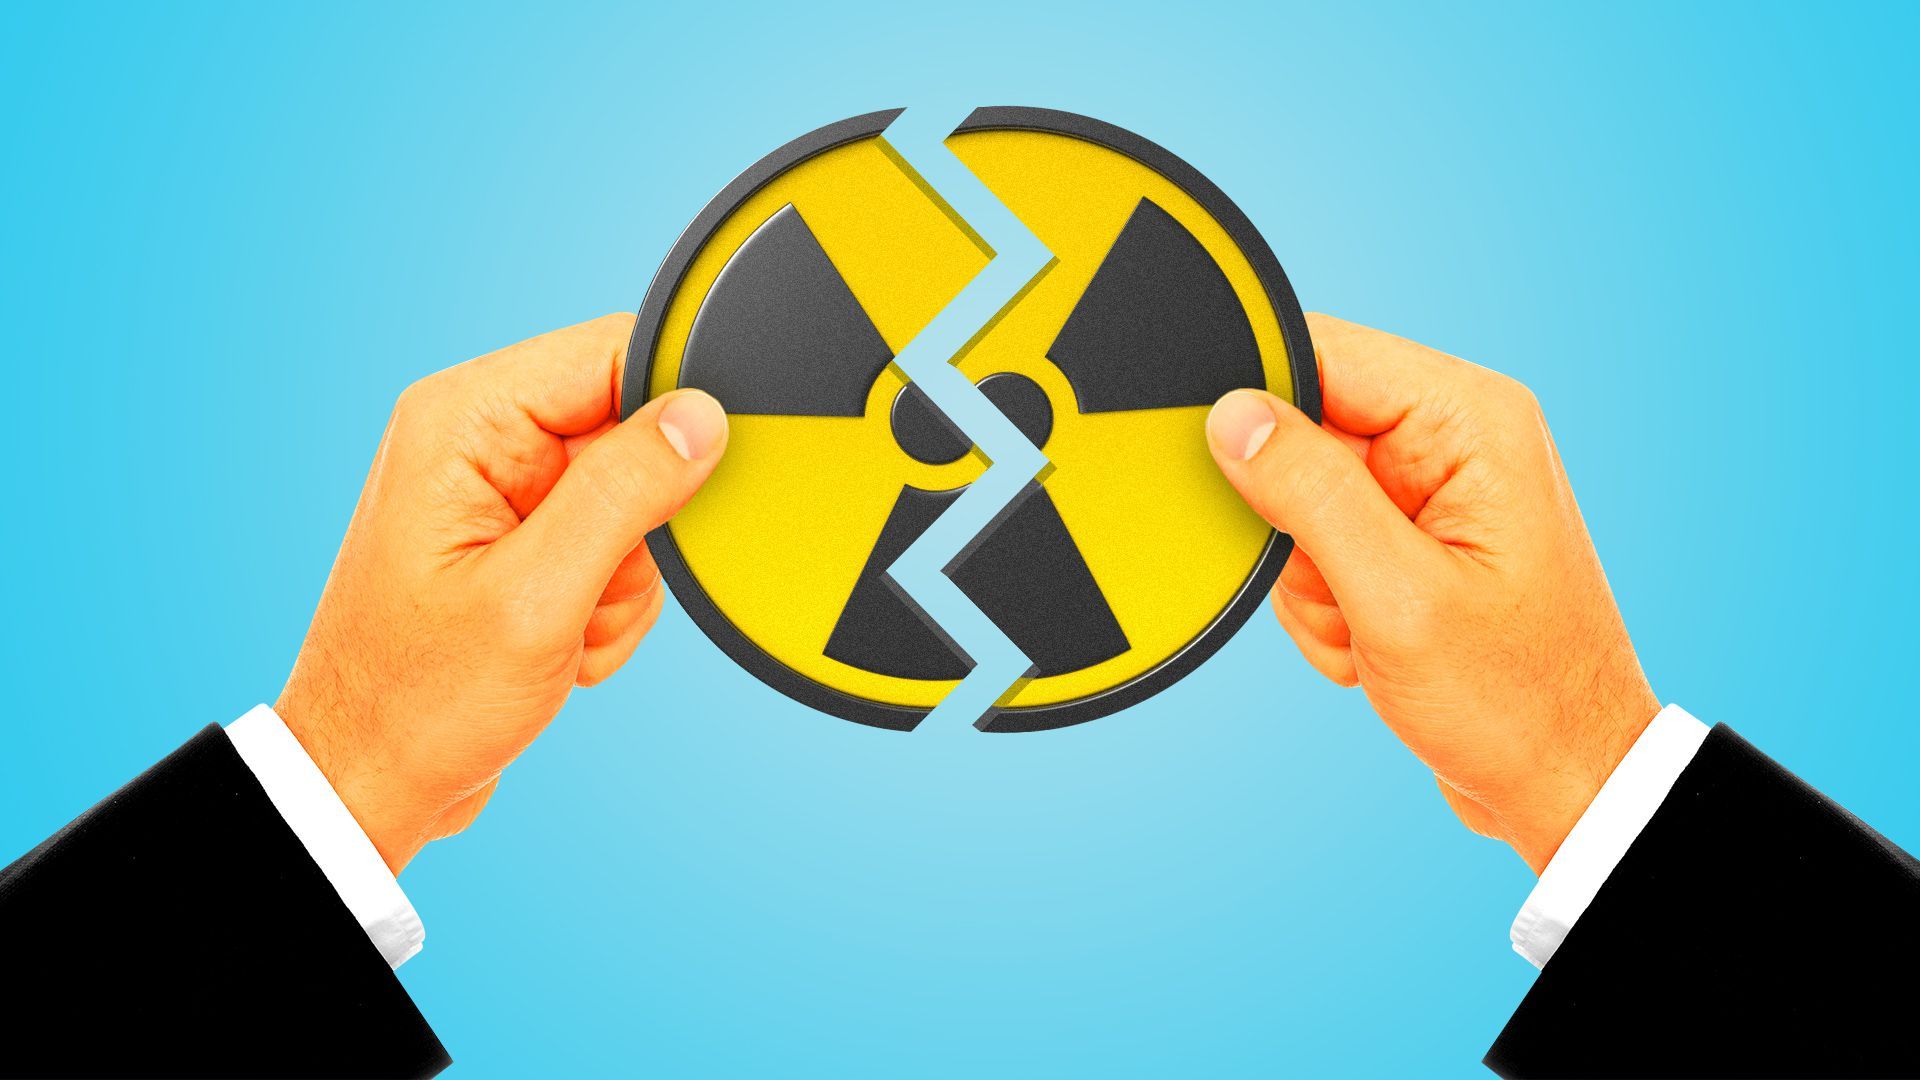 Illustration of two hands with matching pieces of a nuclear symbol.   